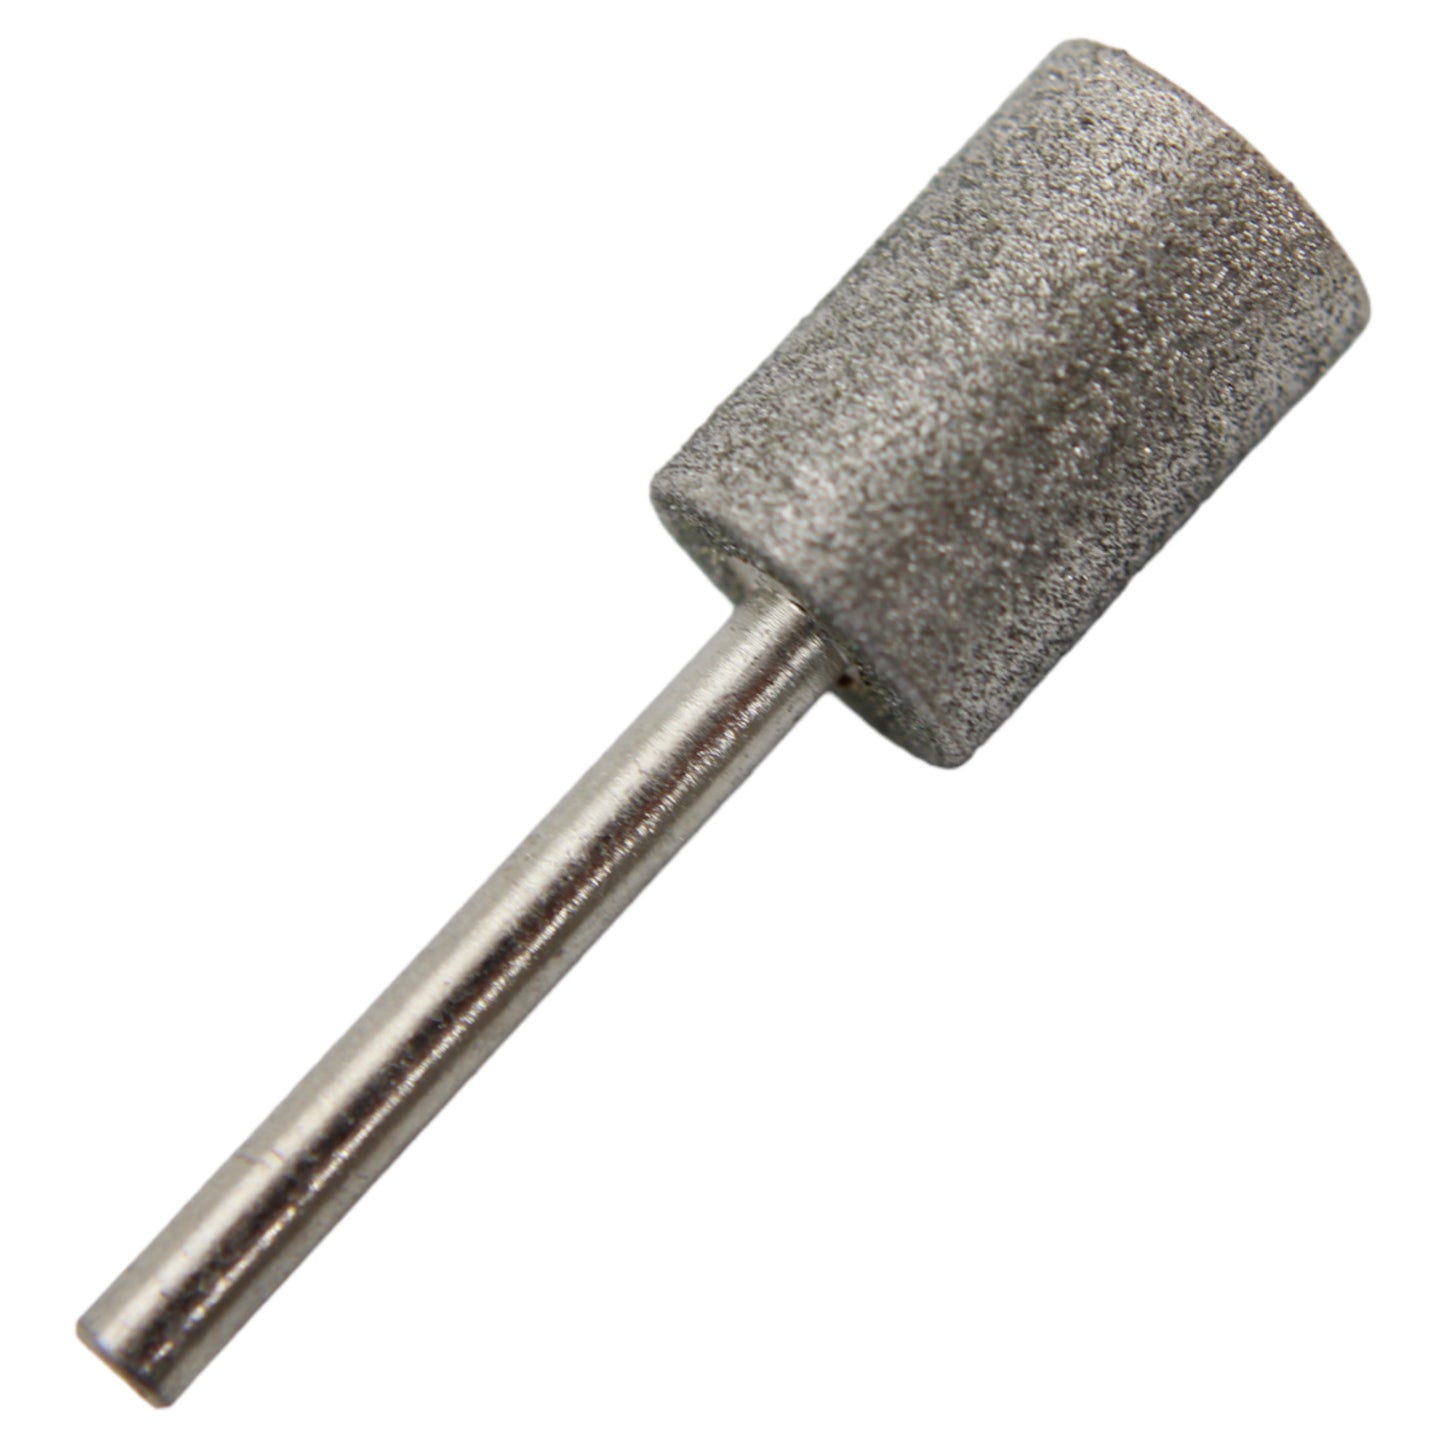 Diamond Heads for Dremel type Nail Grinders?